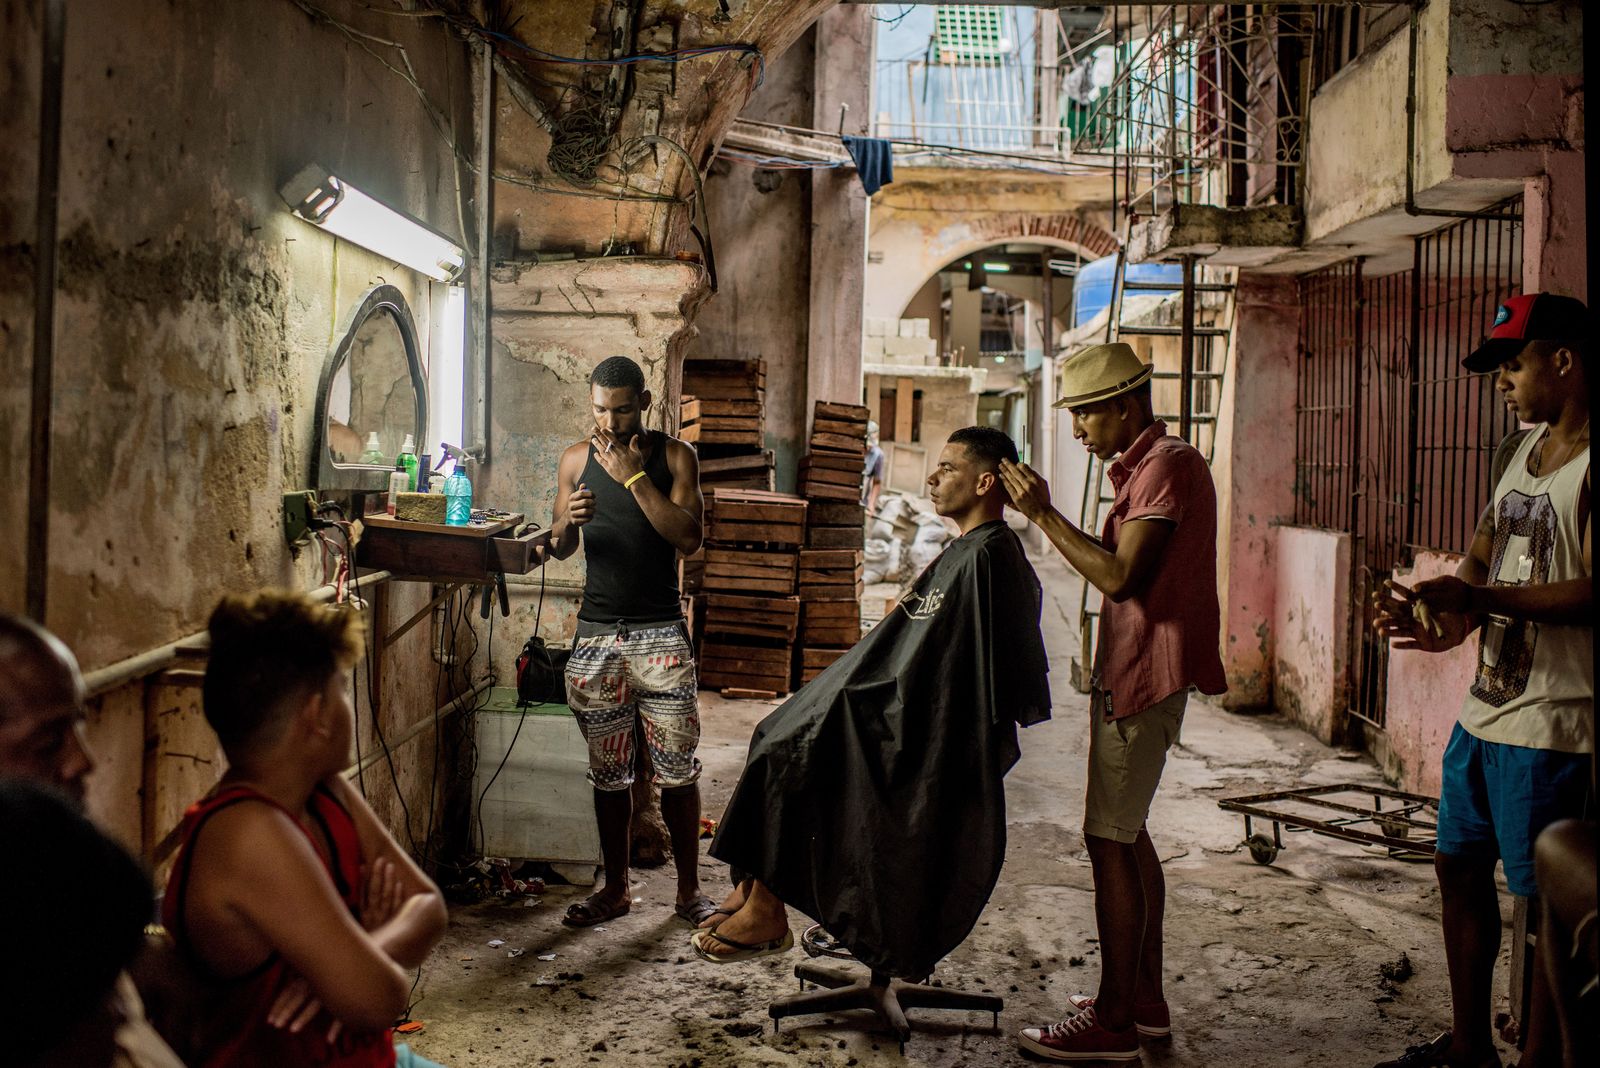 © Tomas Munita (1st Prize Daily Life Story) - A weathered barber shop in Old Havana, Cuba.